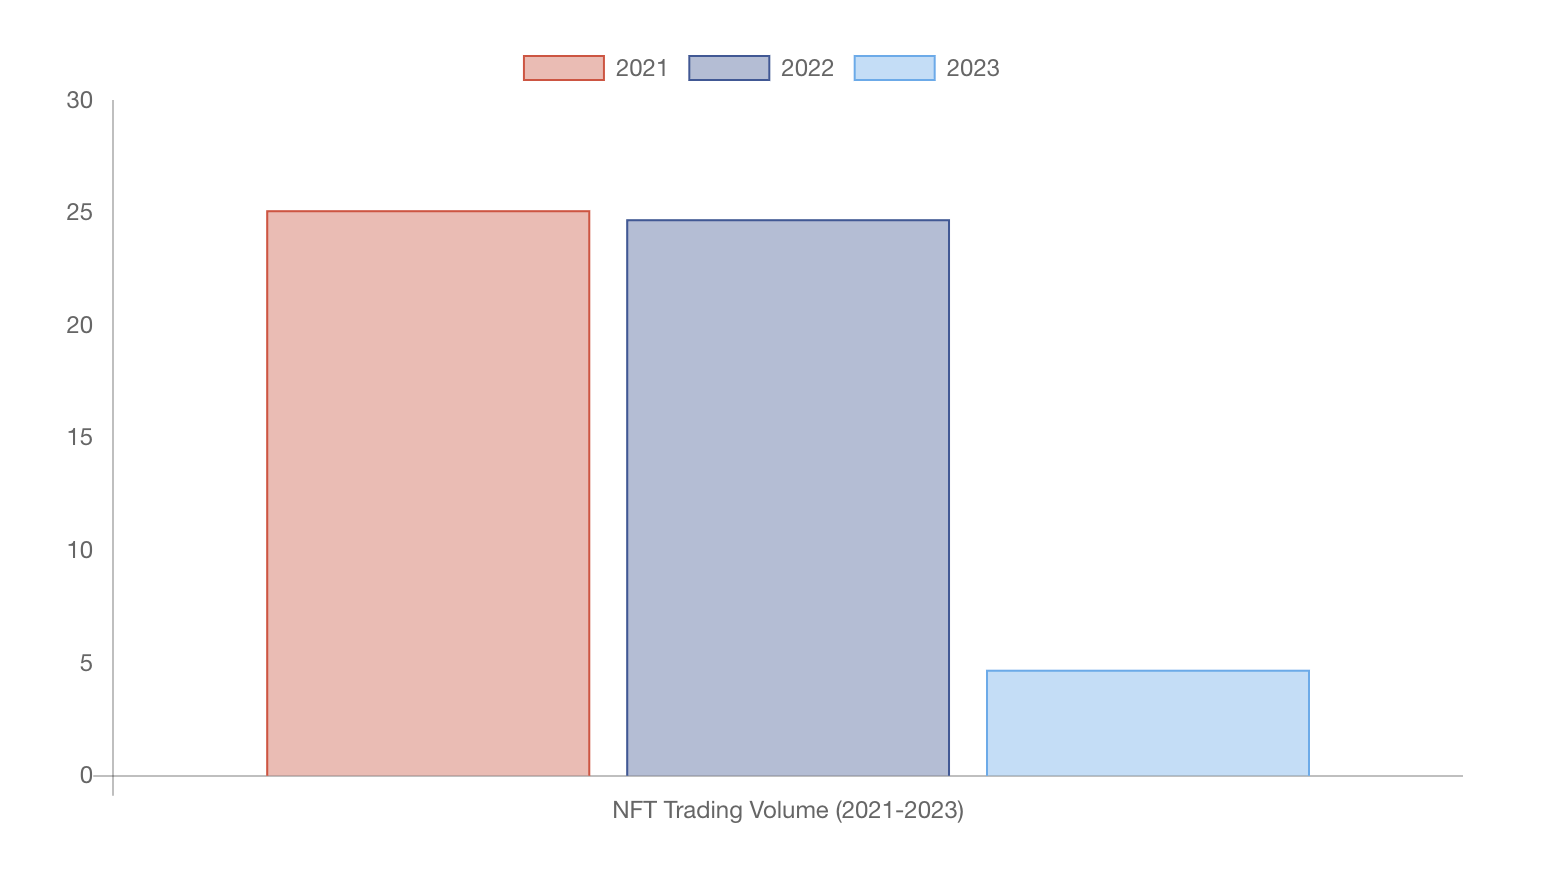 NFT trading volume from 2021 to 2023